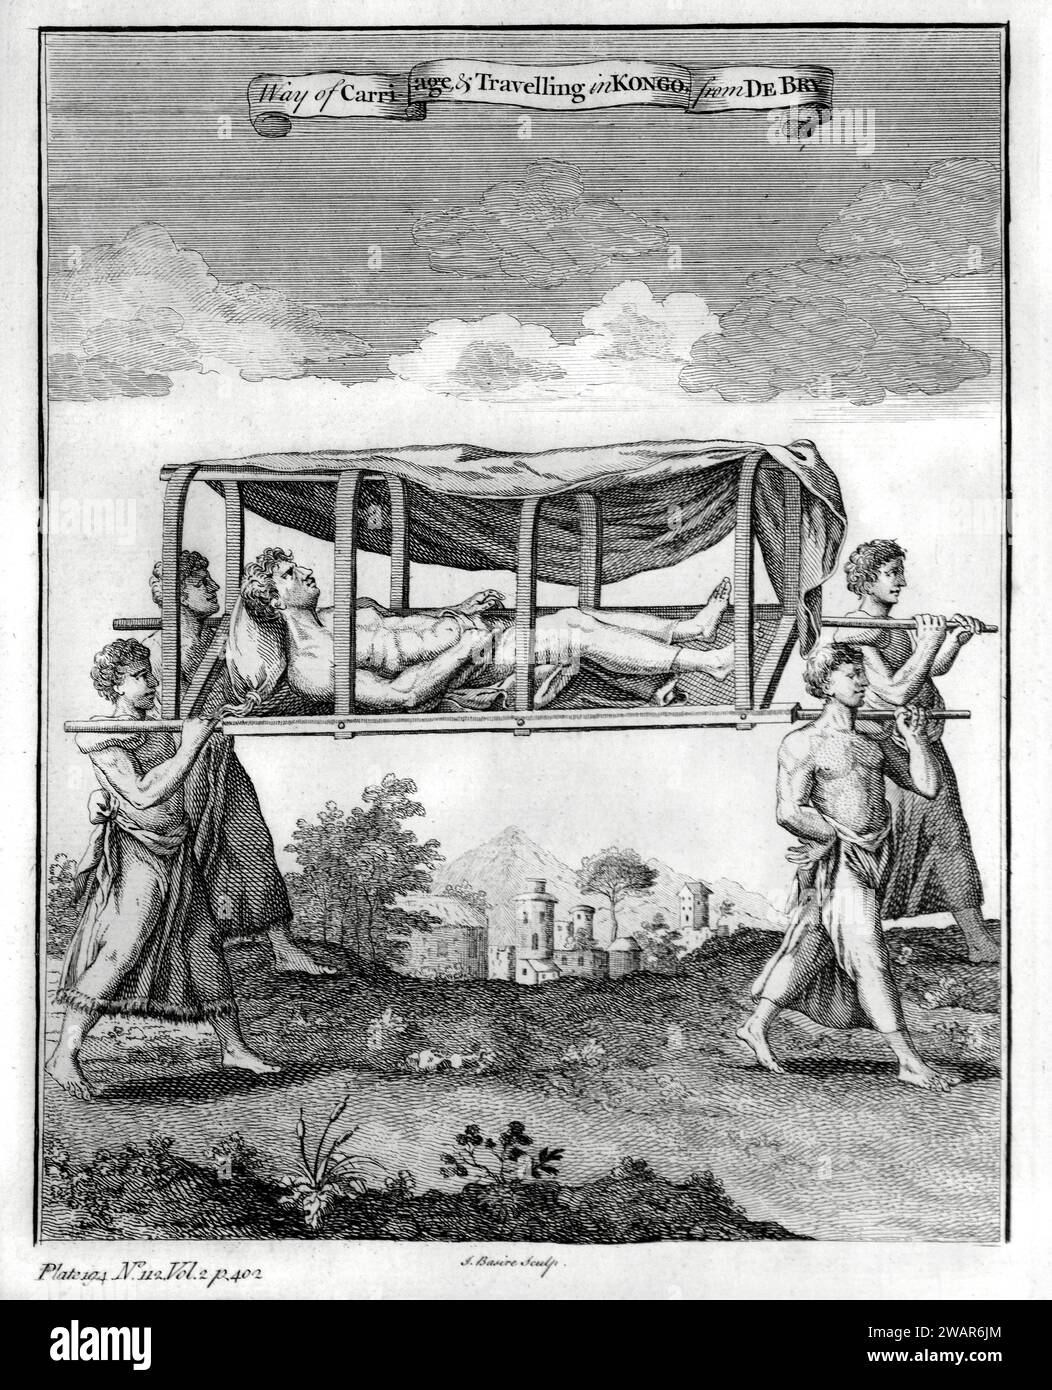 Native or African Porters Carrying Tribal Chief in a Palanquin or Travelling by Palanquin, Litter or Sedan Chair in the Congo Africa. Vintage or Historic Engraving or Illustration by de Bry c18th Stock Photo